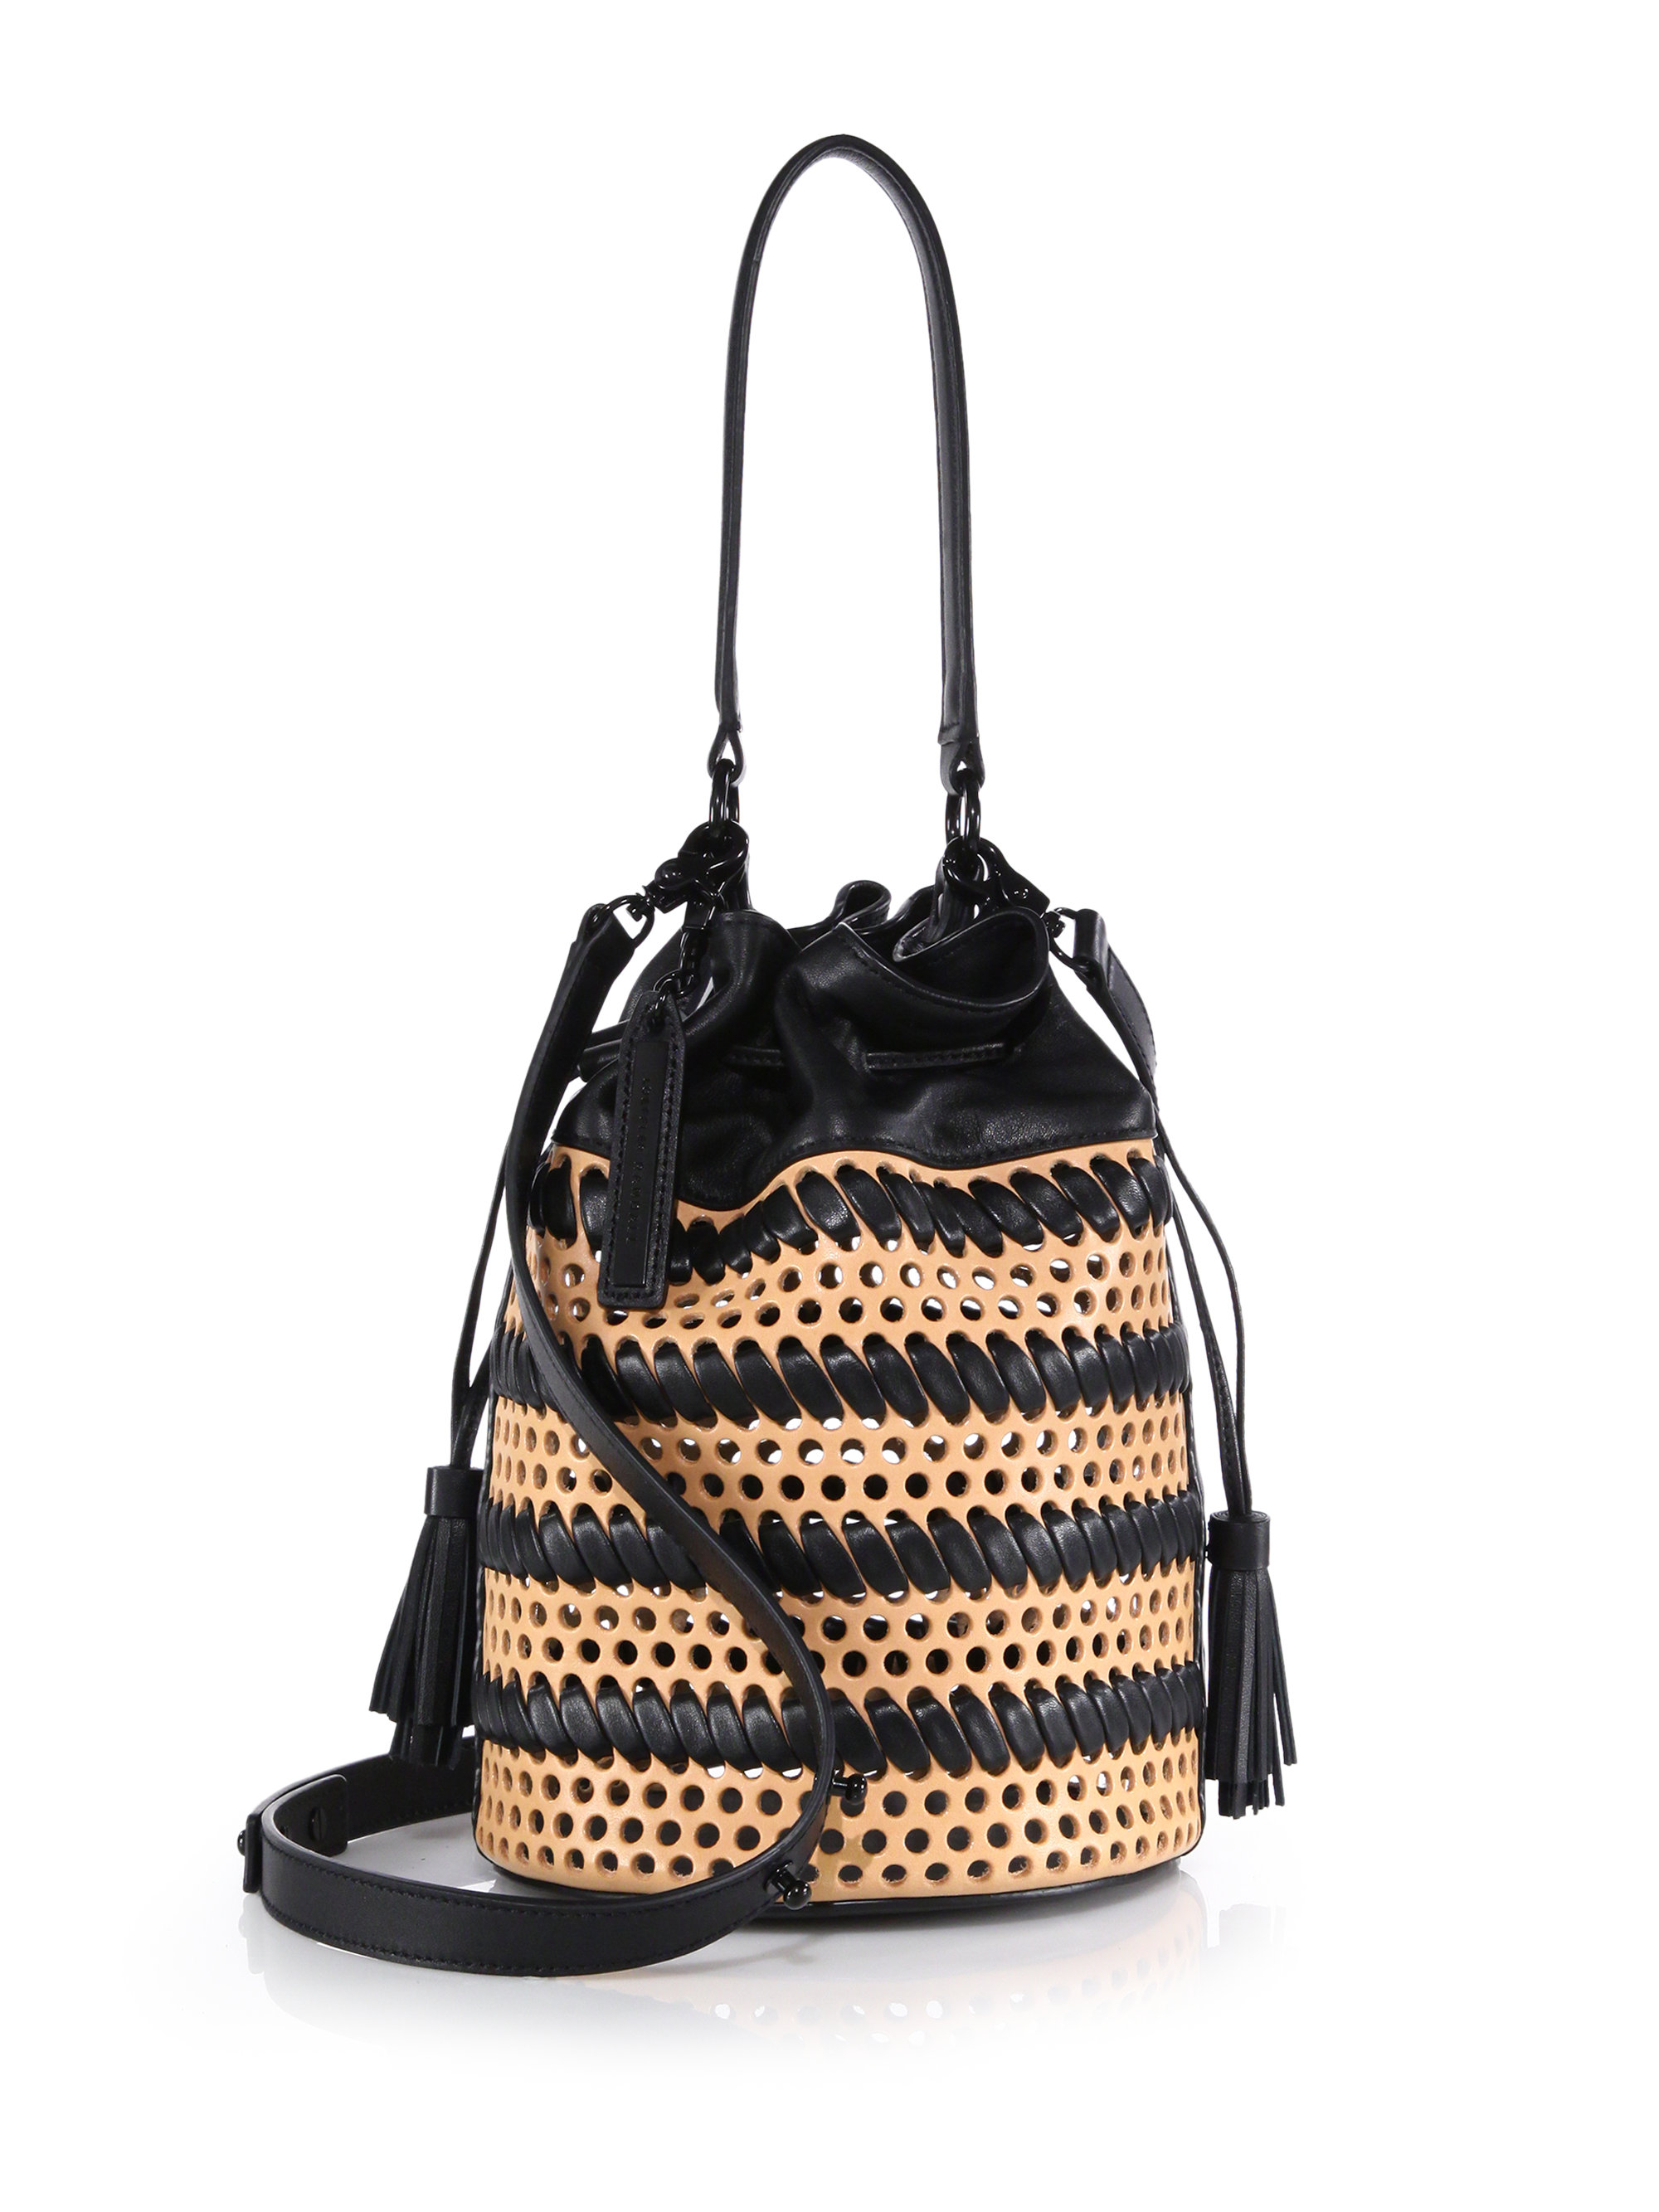 Lyst - Loeffler Randall Industry Bicolor Perforated & Whipstitched ...